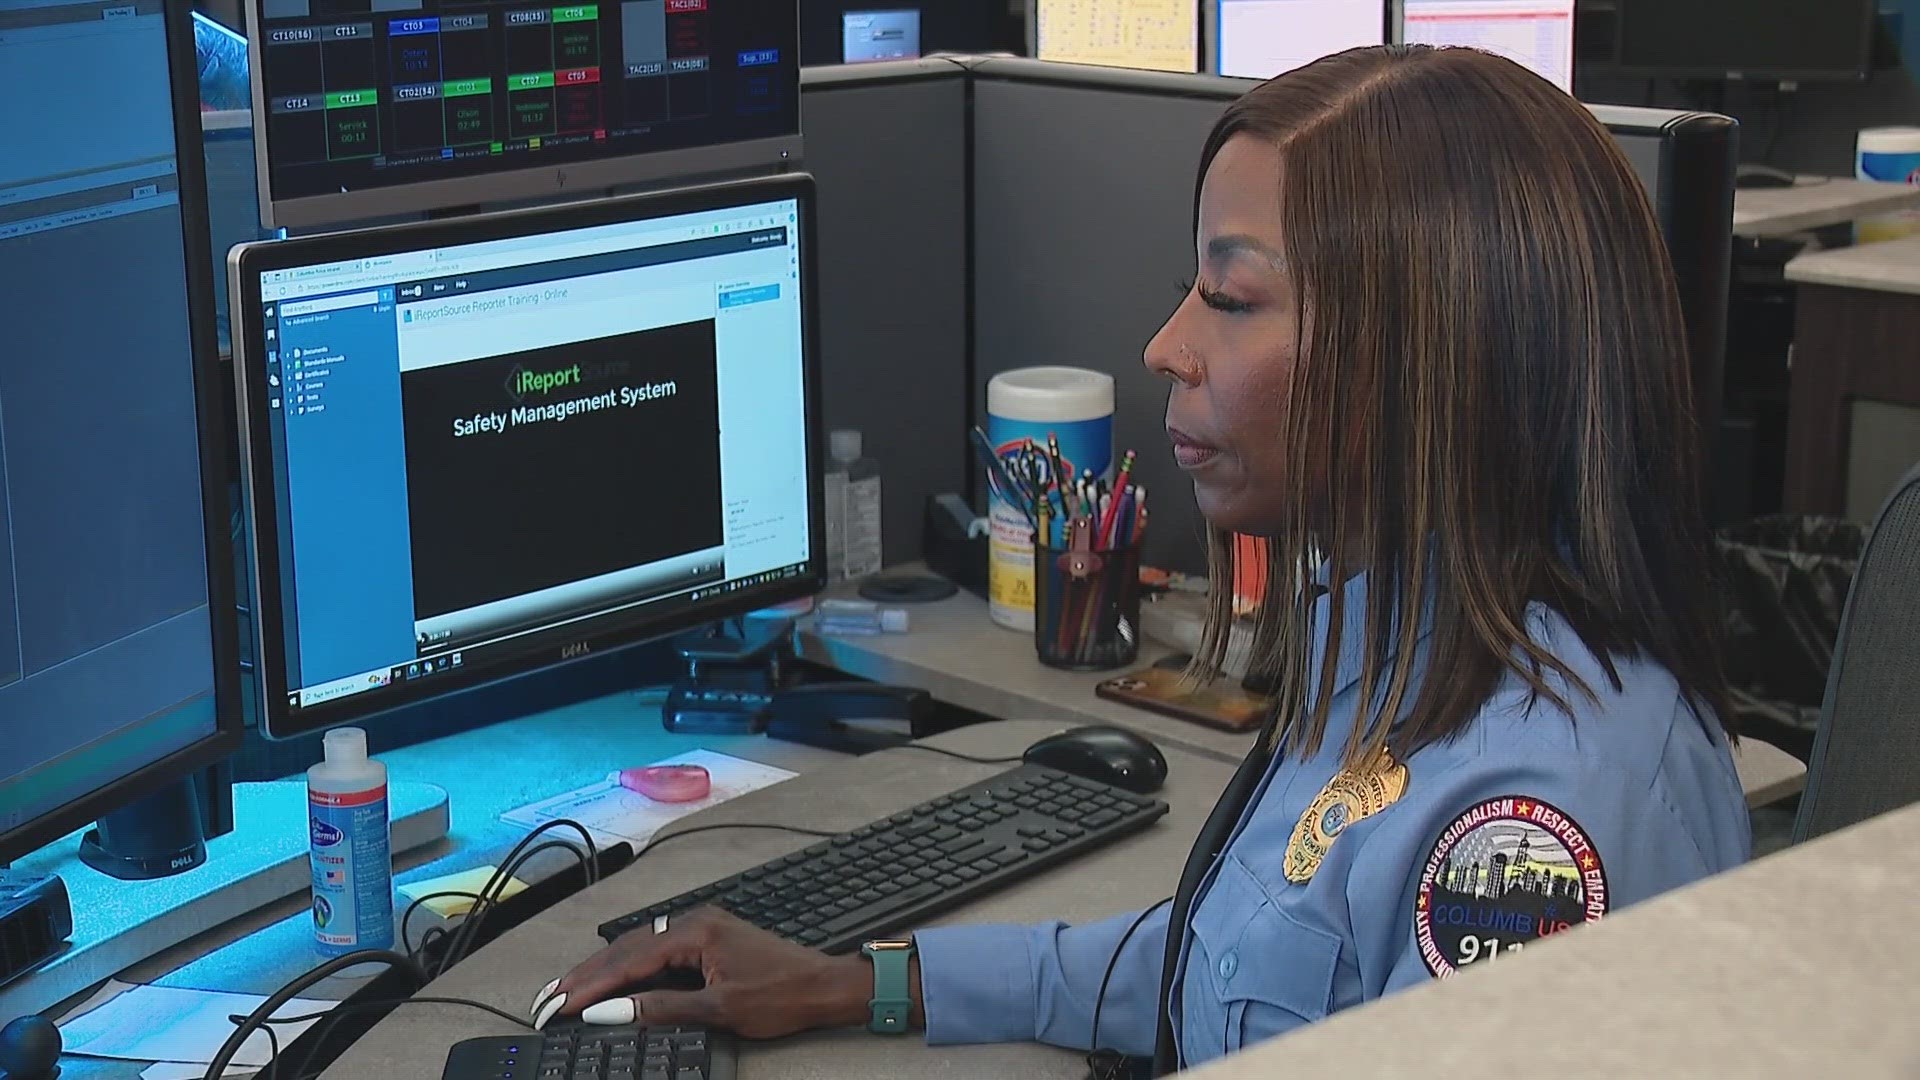 Wendy Massey is a 911 dispatcher supervisor for Columbus. She lifts weights to manage her stress and eventually became a professional bodybuilder.